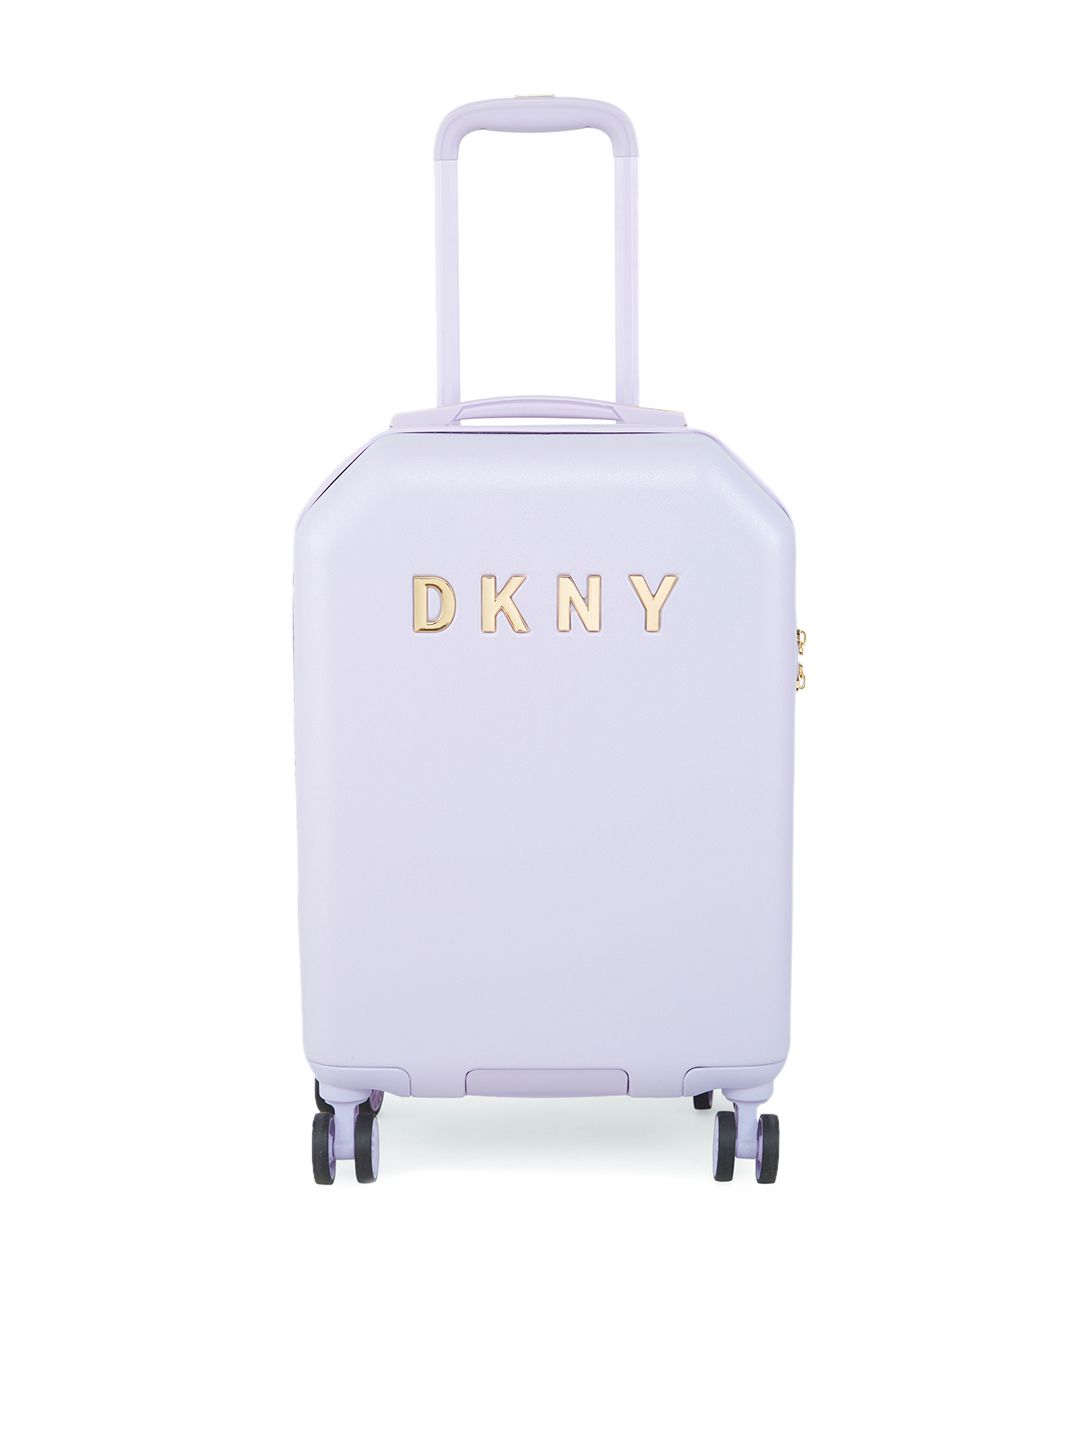 DKNY Allore  Range Lilac Hard Cabin Suitcase Price in India